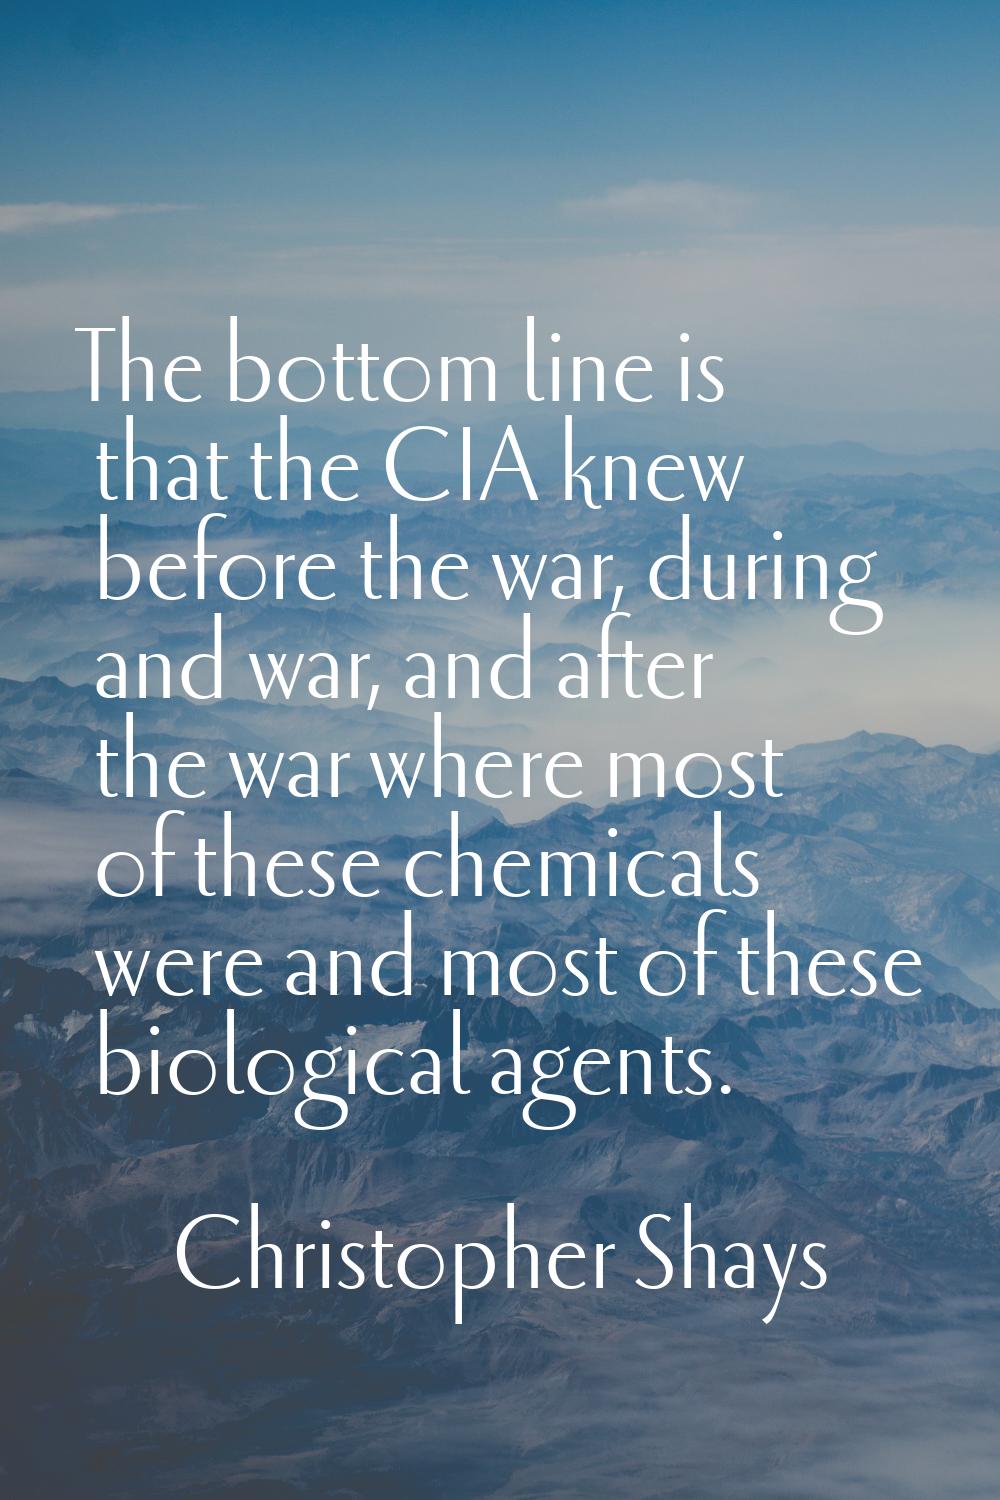 The bottom line is that the CIA knew before the war, during and war, and after the war where most o